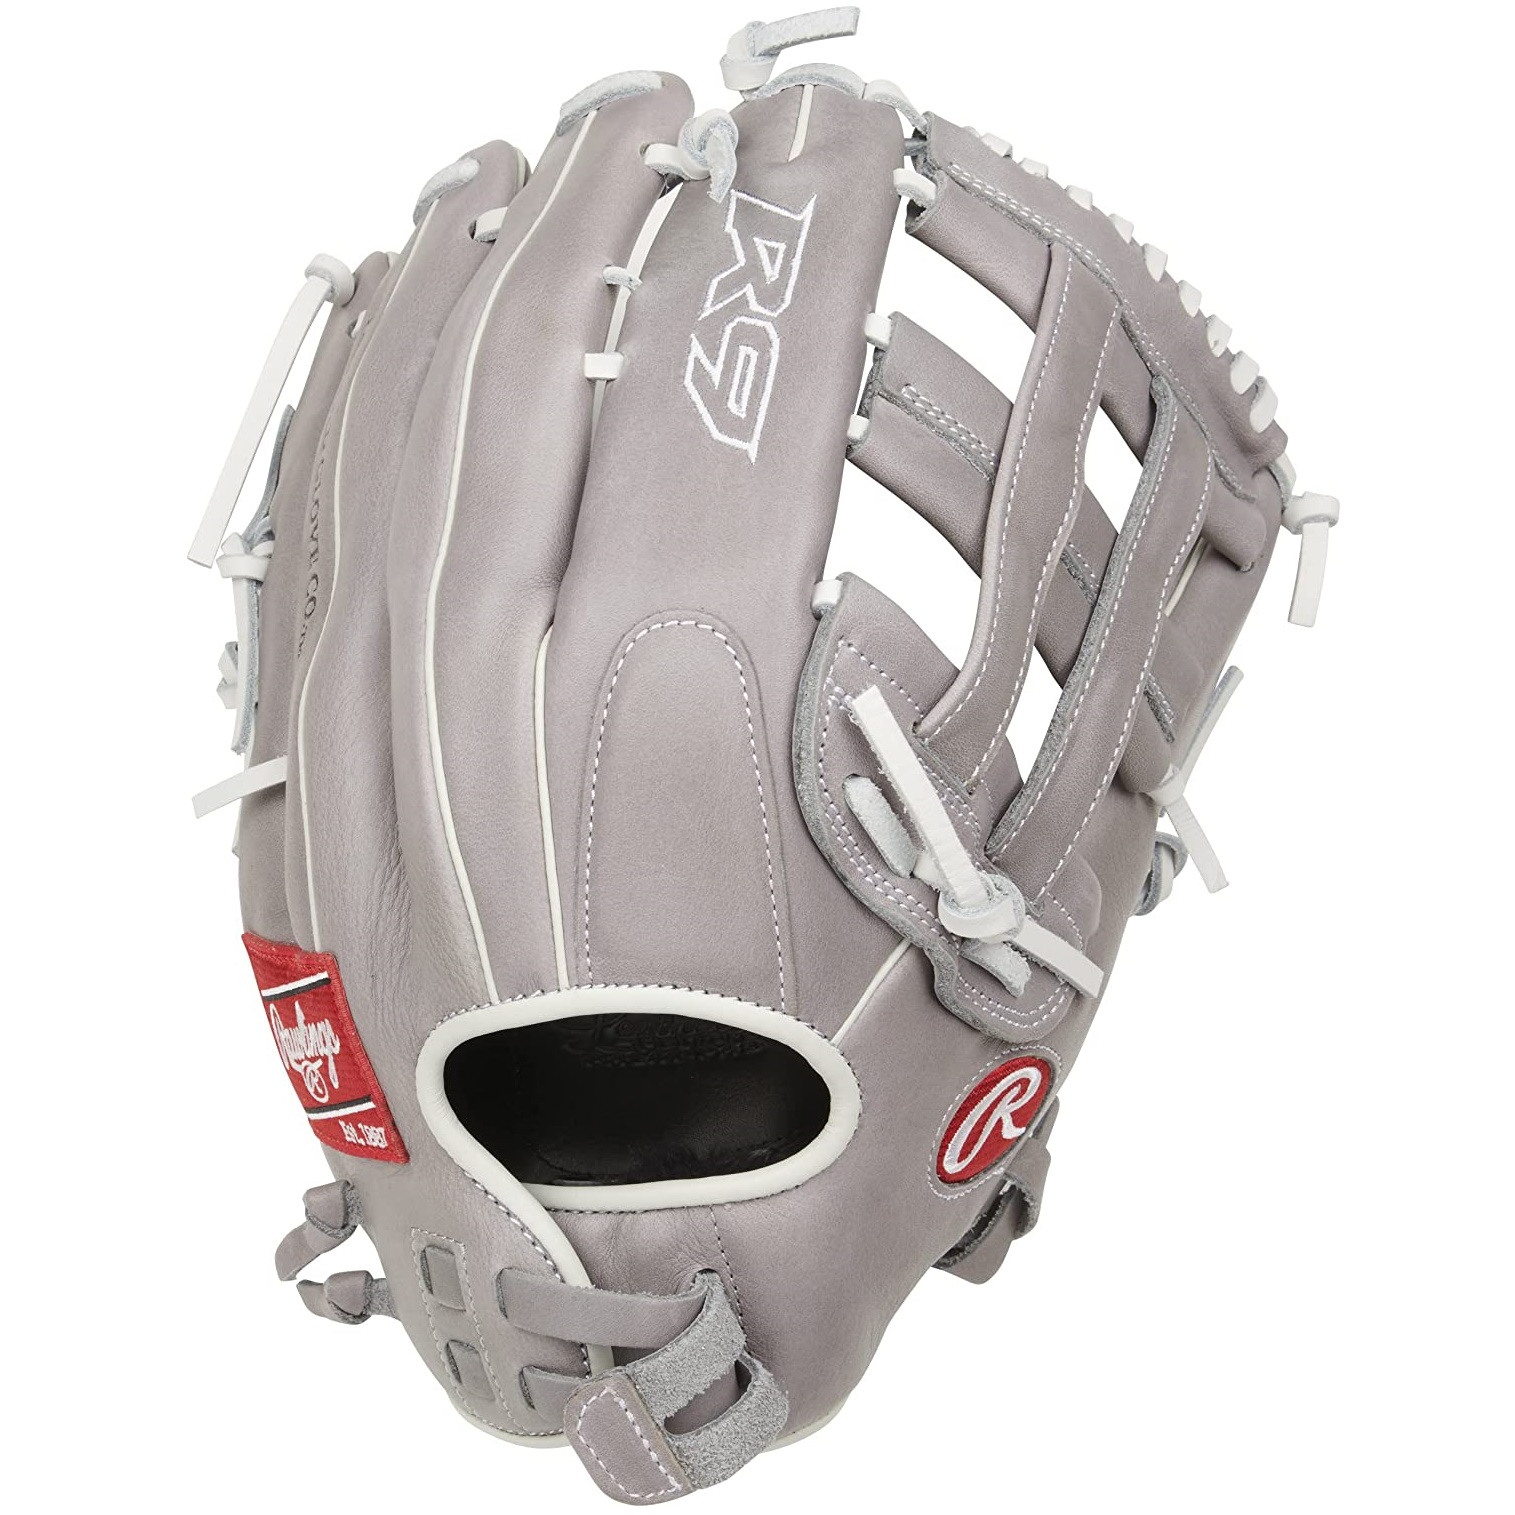  This Rawlings R9 series features soft, durable all-leather shells designed to be game-ready. With pro style patterns and a reinforced palm pad for impact reduction, this series is perfect for the Select Player in the 8-14 age range.    Back: Adjustable Pull Strap     Fit: Narrow     Level: Adult     Padding: Leather cushioned palm pad     Pattern: 130SB     Player Break-In: 20     Series: R9     Shell: Soft, durable all-leather     Sport: Softball     Throwing Hand: Right     Web: Pro H     Age Group: High School, 14U, 12U   